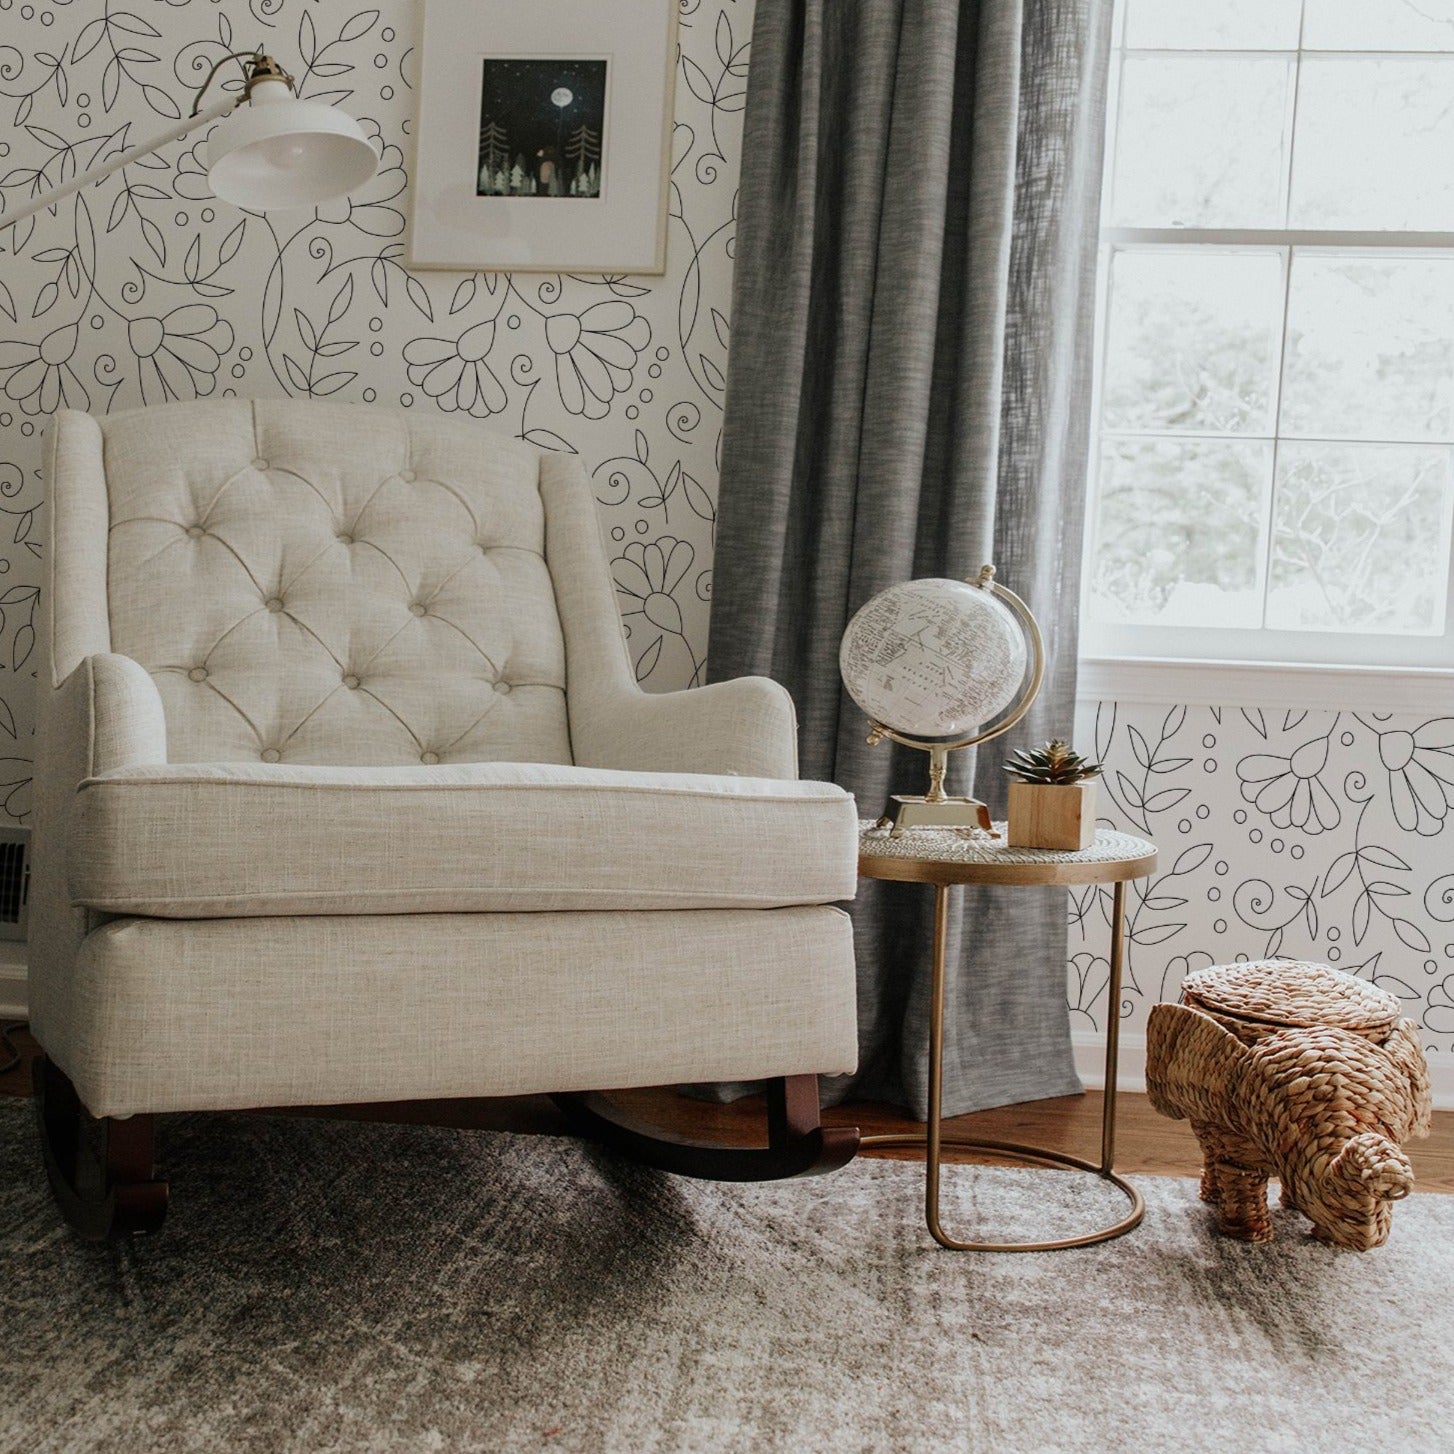 A cozy reading corner with the Simple Black Floral Wallpaper accentuating the wall behind a tufted beige armchair, a rustic globe table lamp, and wicker animal-shaped basket, creating a charming and inviting space